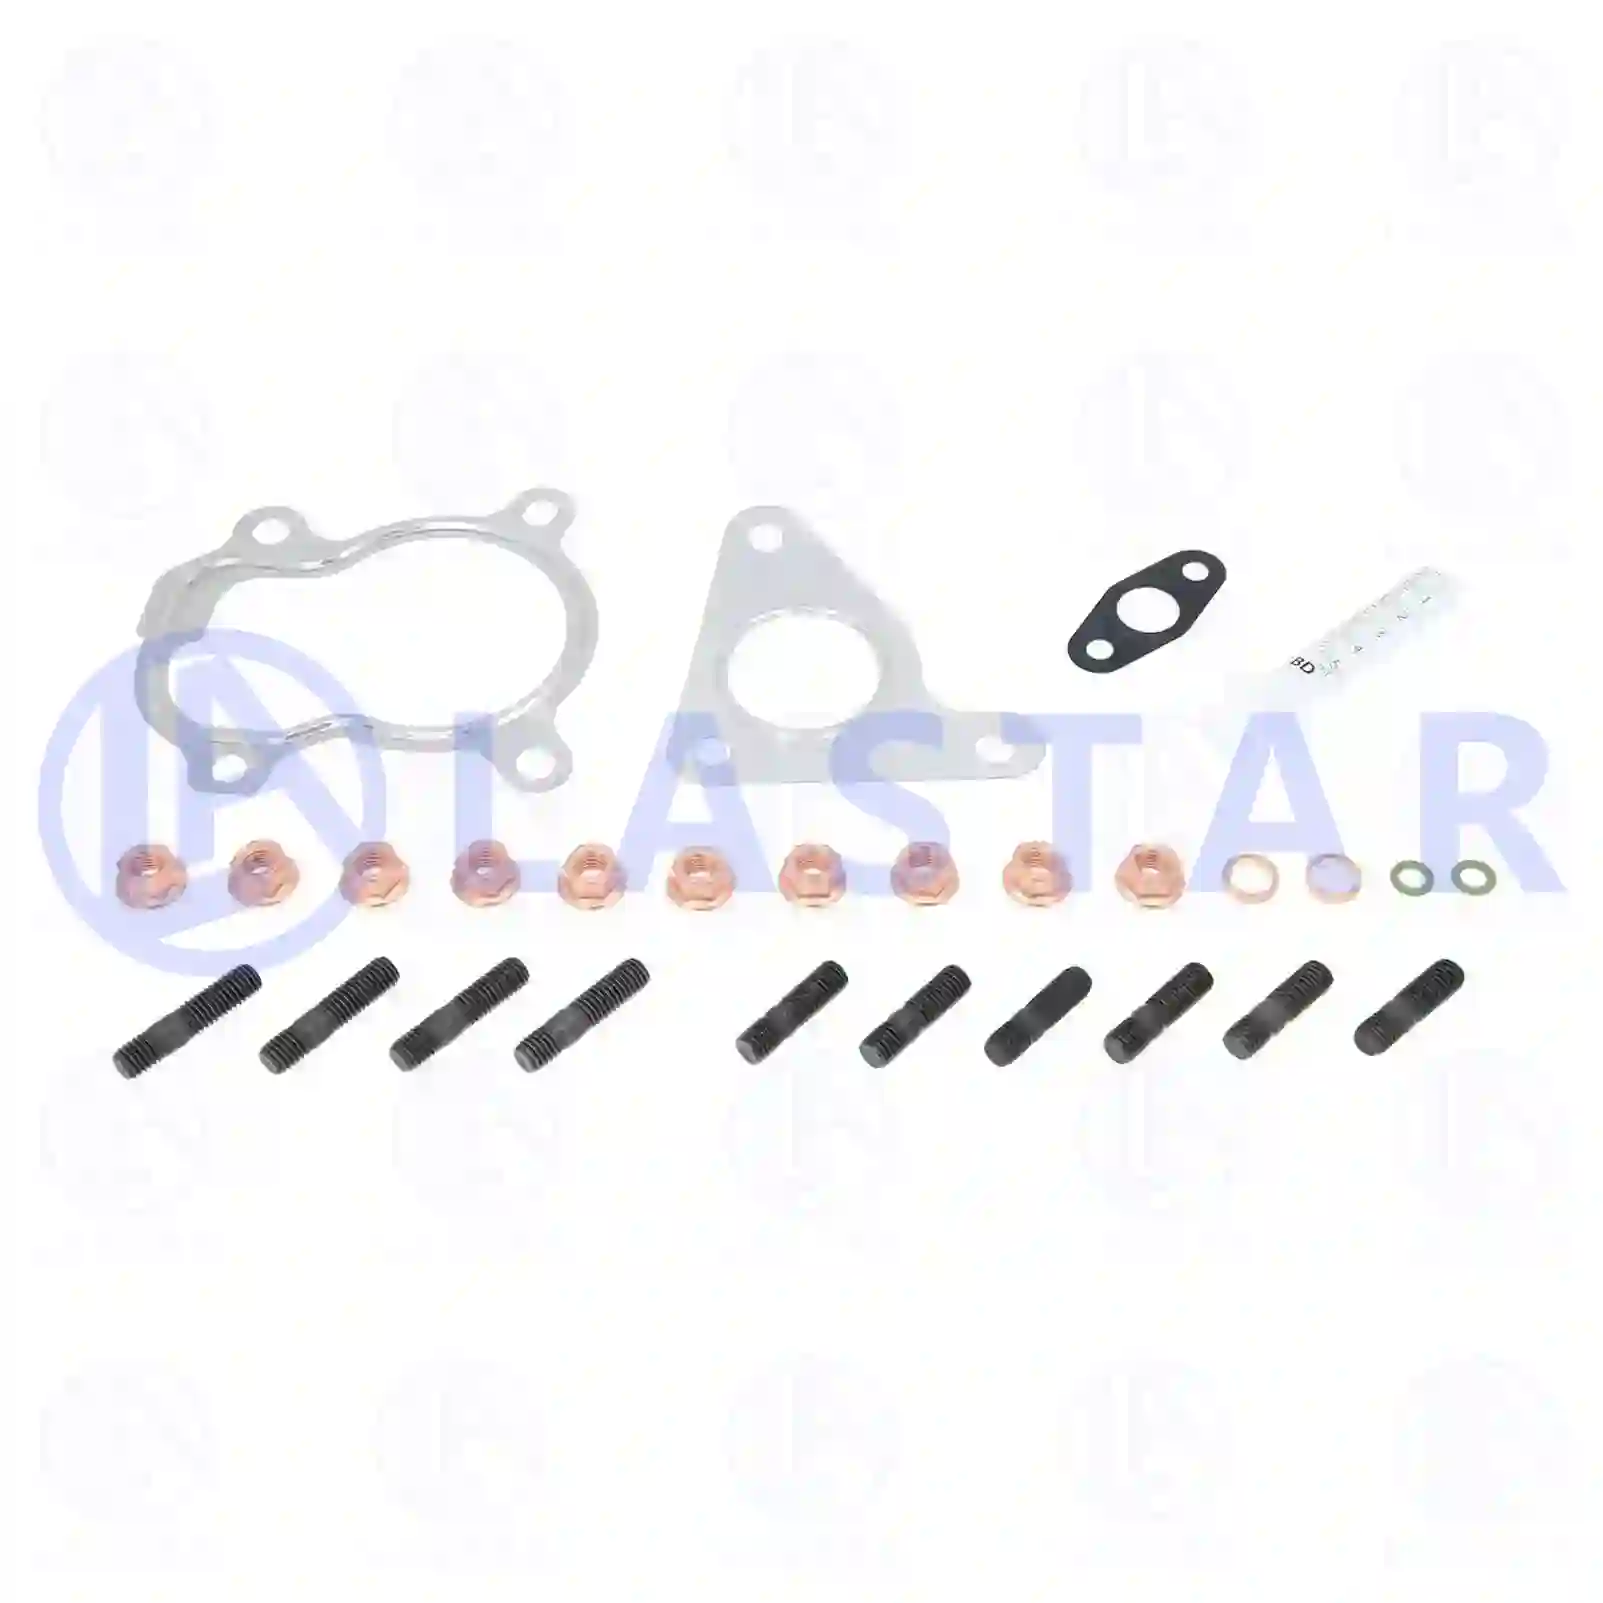 Gasket kit, turbocharger, 77703637, 9121244S, 93160135S, 93184486S, 93184488S, 93187292S, 93198156S, 93198157S, 14411-00Q0AS, 14411-00QAAS, 4405411S, 4409975S, 4416393S, 4433761S, 4433764S, 5860004S, 5860005S, 7700108052S, 7701472228S, 7701476298S, 7701478026S, 7711134299S, 7711134774S, 7711497142S, 8200046681S, 8200091350S, 8200348242S, 8200348244S, 8200458160S, 8200458162S, 8200544907S, 8200544911S, 8200683853S, 8200683854S ||  77703637 Lastar Spare Part | Truck Spare Parts, Auotomotive Spare Parts Gasket kit, turbocharger, 77703637, 9121244S, 93160135S, 93184486S, 93184488S, 93187292S, 93198156S, 93198157S, 14411-00Q0AS, 14411-00QAAS, 4405411S, 4409975S, 4416393S, 4433761S, 4433764S, 5860004S, 5860005S, 7700108052S, 7701472228S, 7701476298S, 7701478026S, 7711134299S, 7711134774S, 7711497142S, 8200046681S, 8200091350S, 8200348242S, 8200348244S, 8200458160S, 8200458162S, 8200544907S, 8200544911S, 8200683853S, 8200683854S ||  77703637 Lastar Spare Part | Truck Spare Parts, Auotomotive Spare Parts